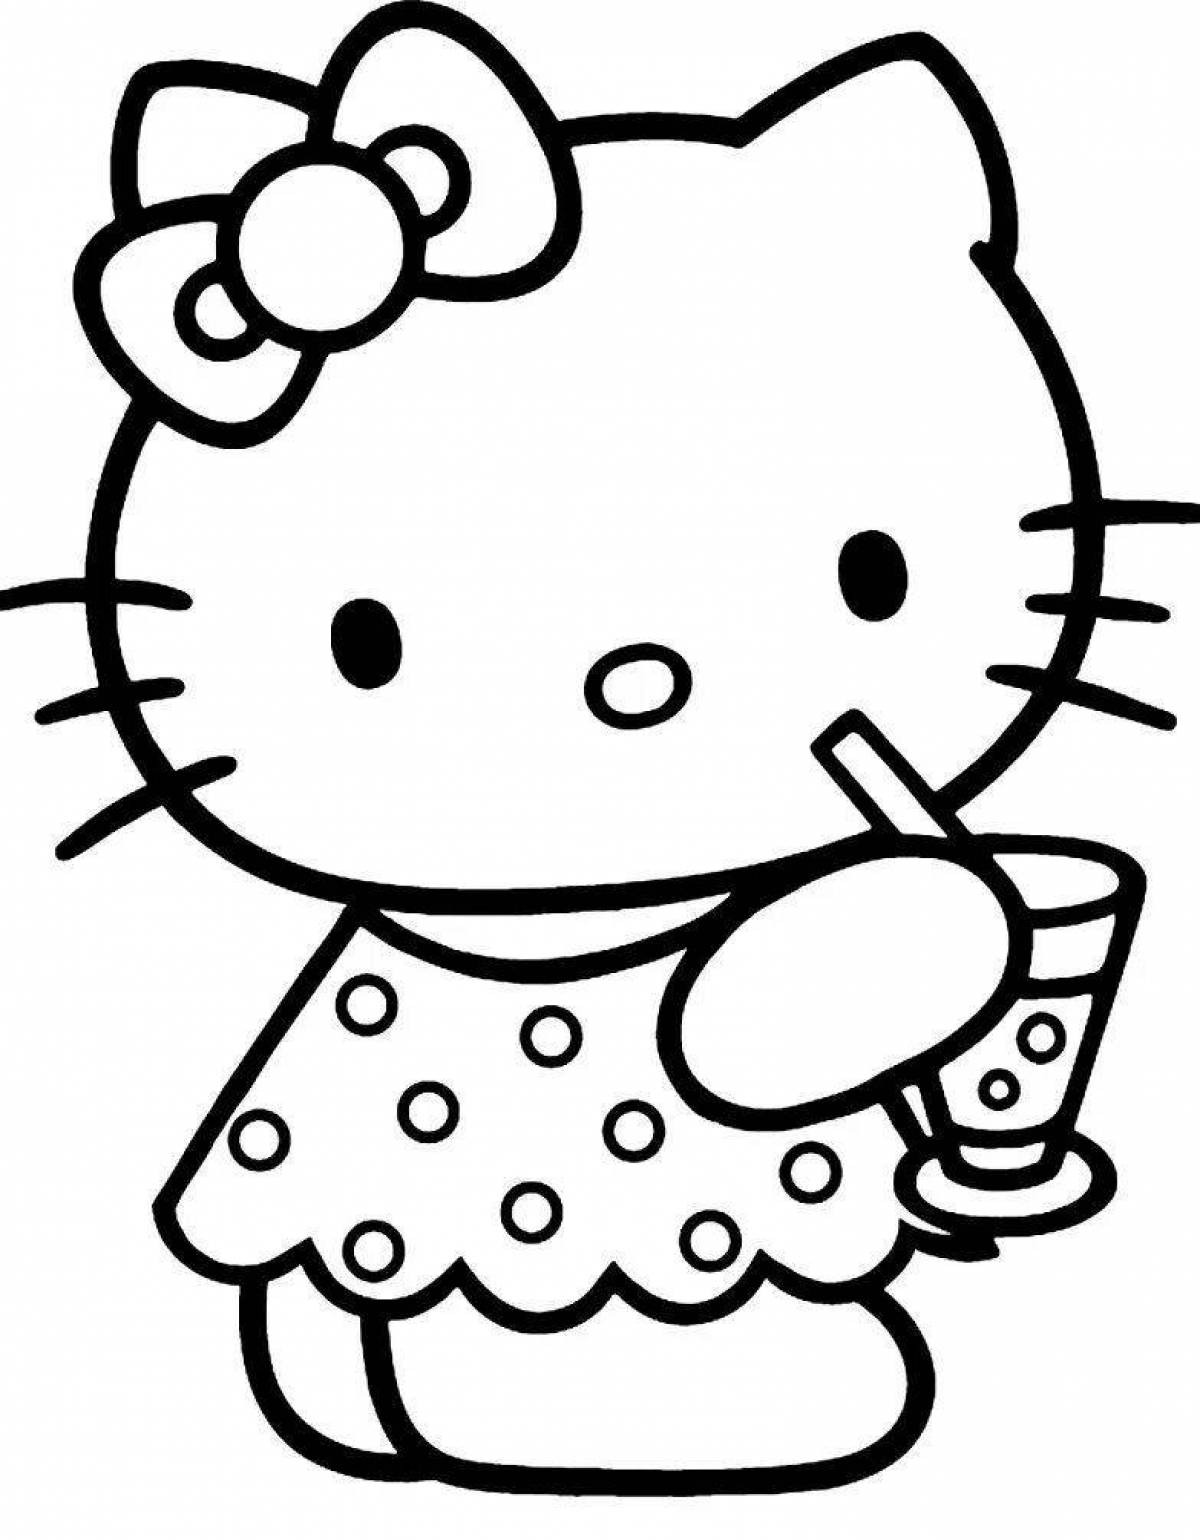 Amazing aster kitty coloring page